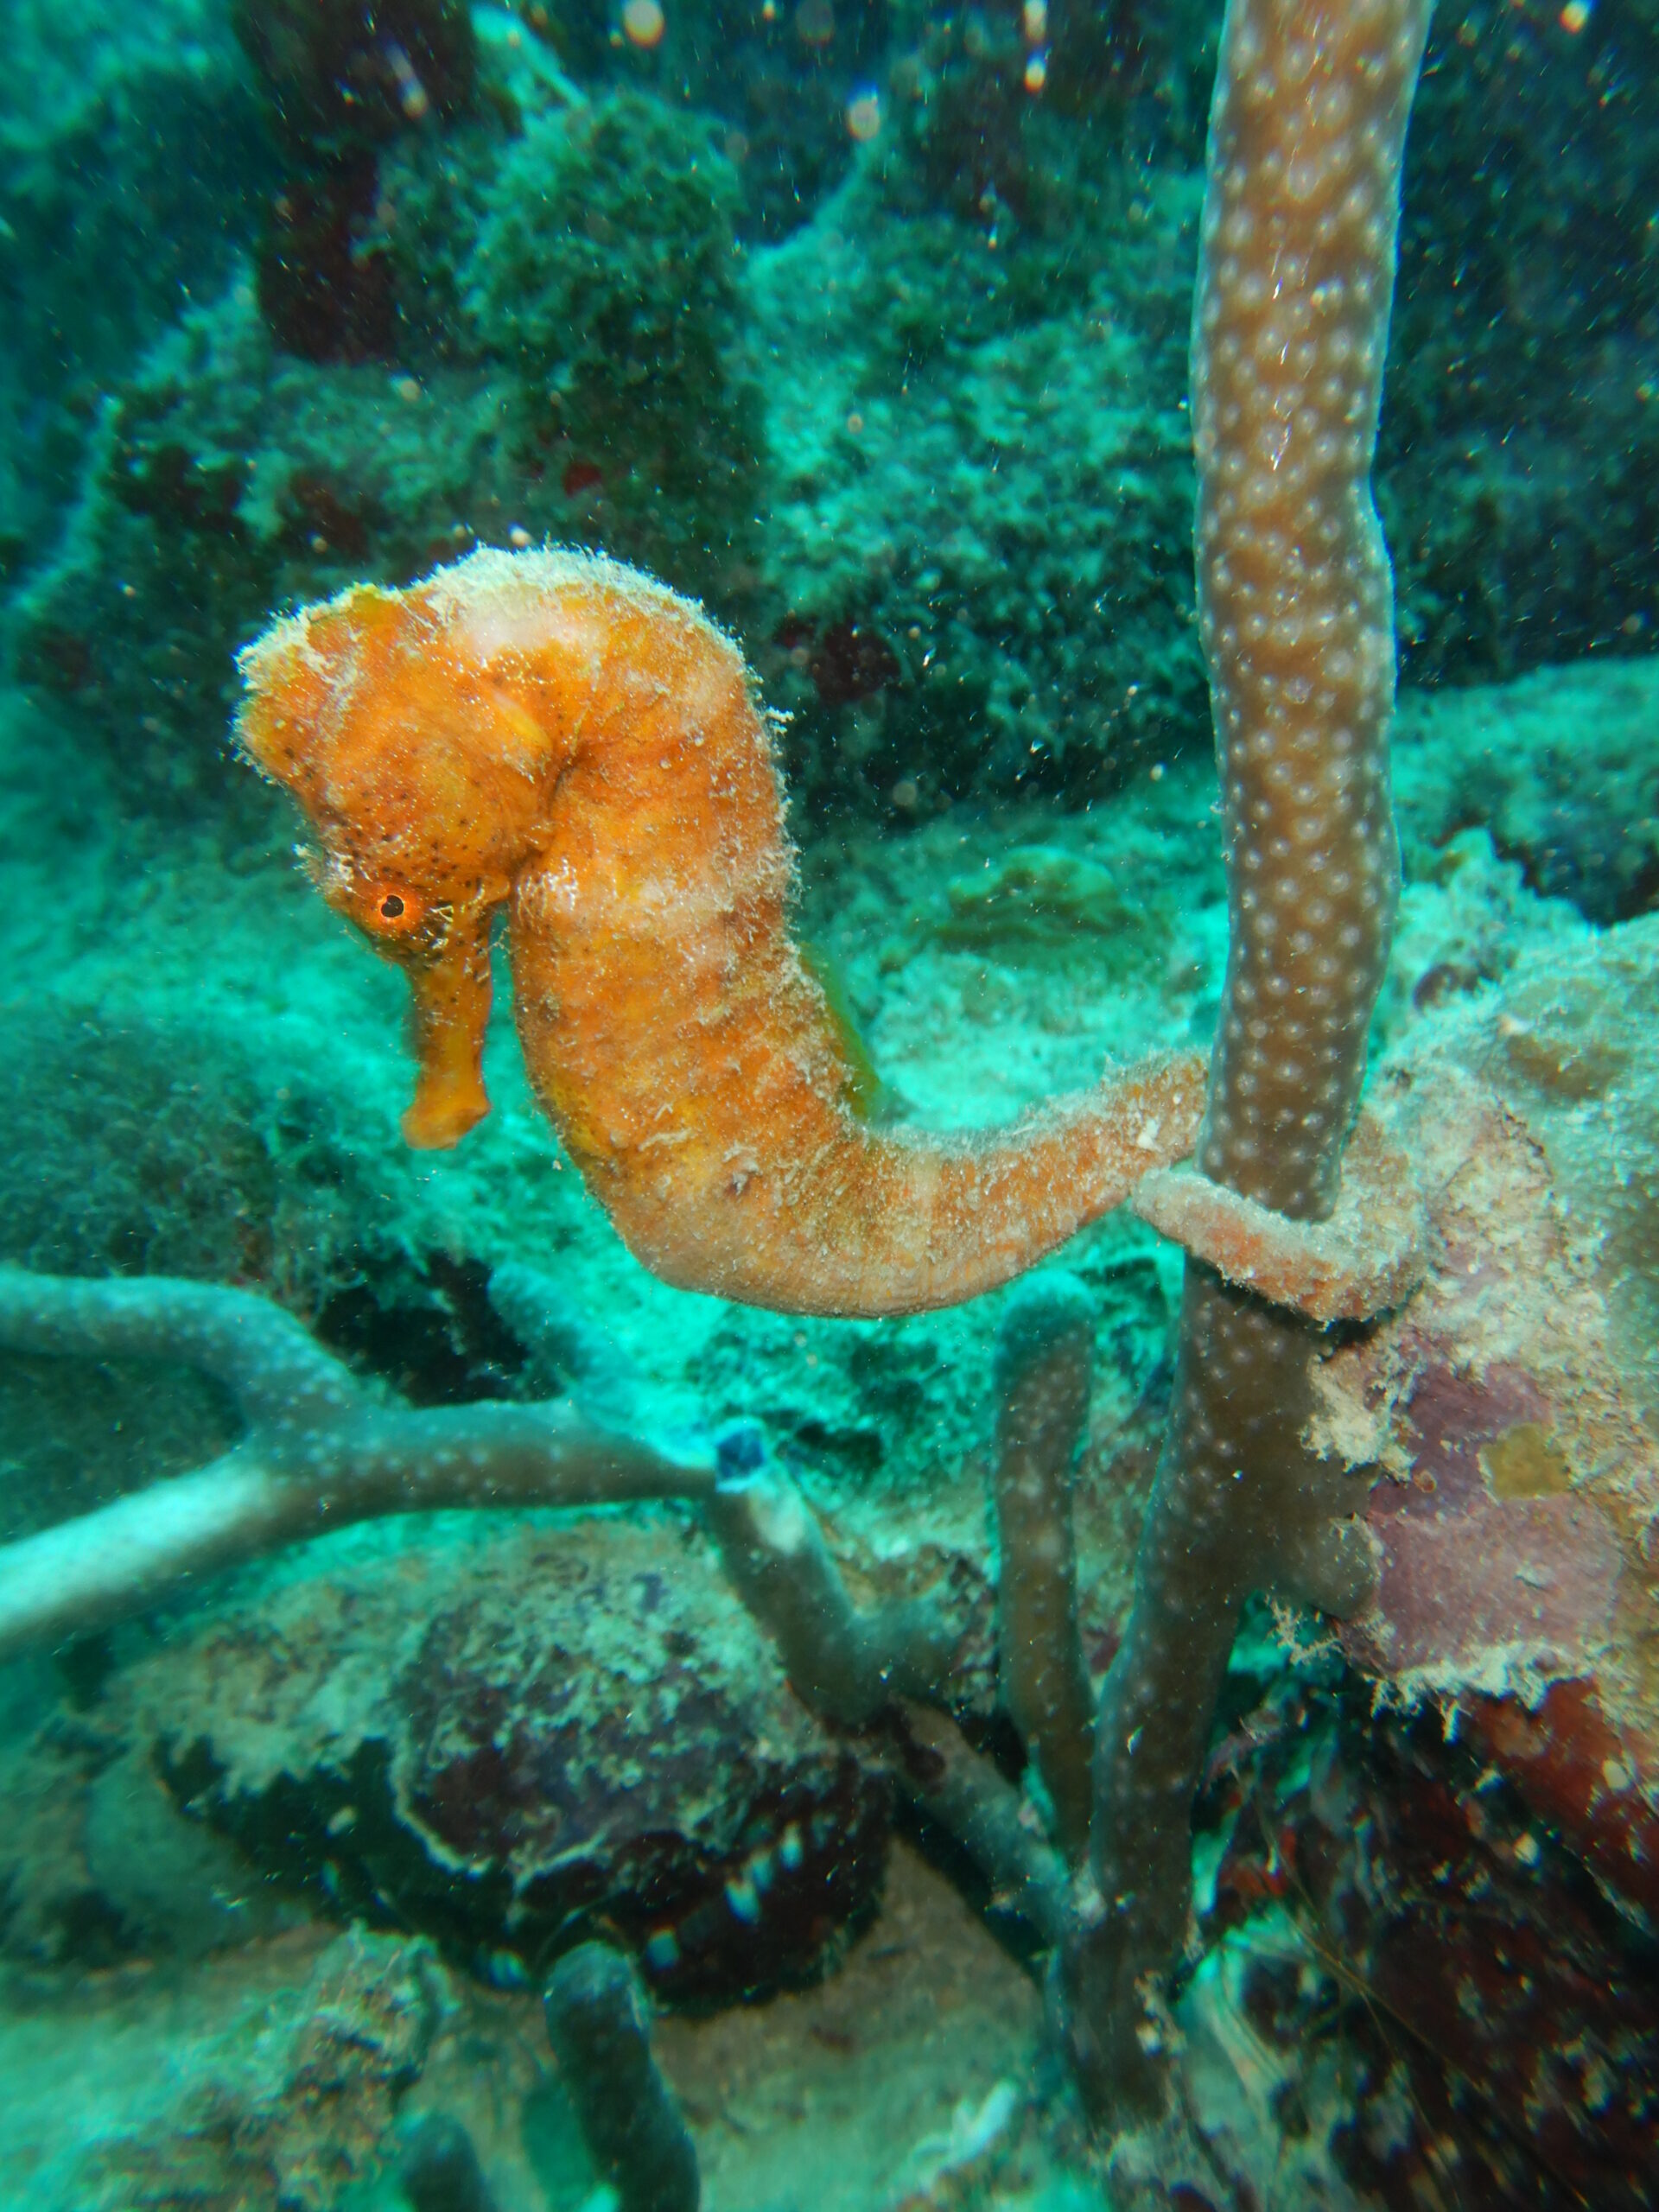 Find a Sea Horse and get a Free Dive (Rules apply)